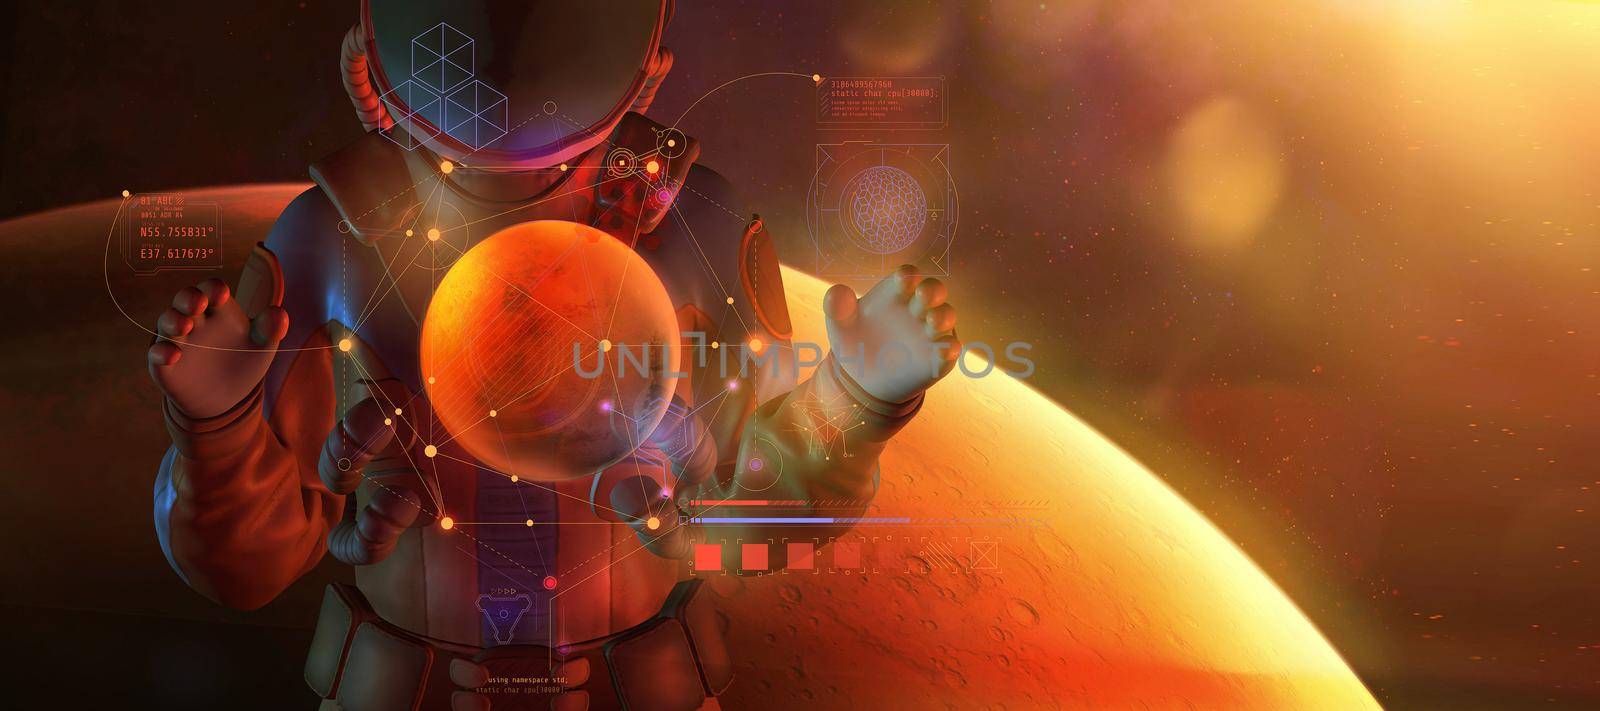 In Mars orbit, a man in a spacesuit examines the received data.